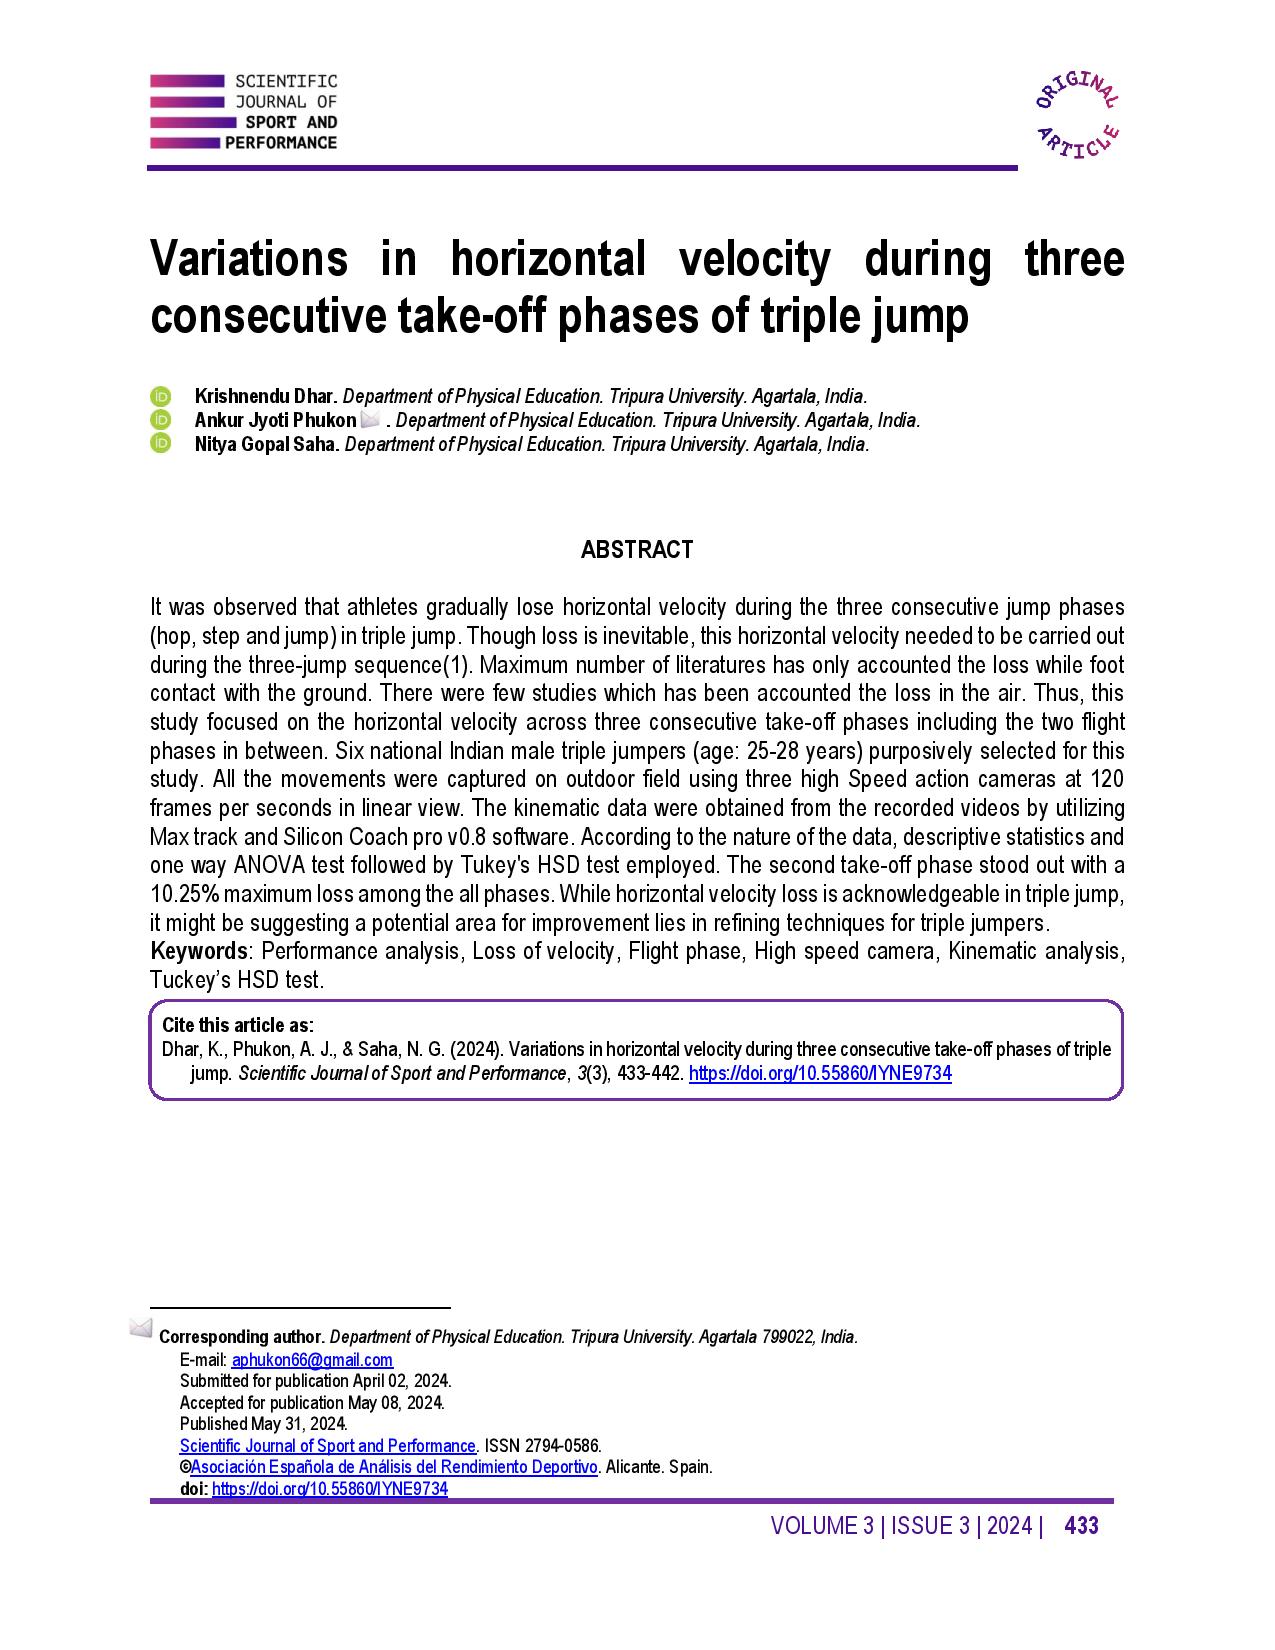 Variations in horizontal velocity during three consecutive take-off phases of triple jump